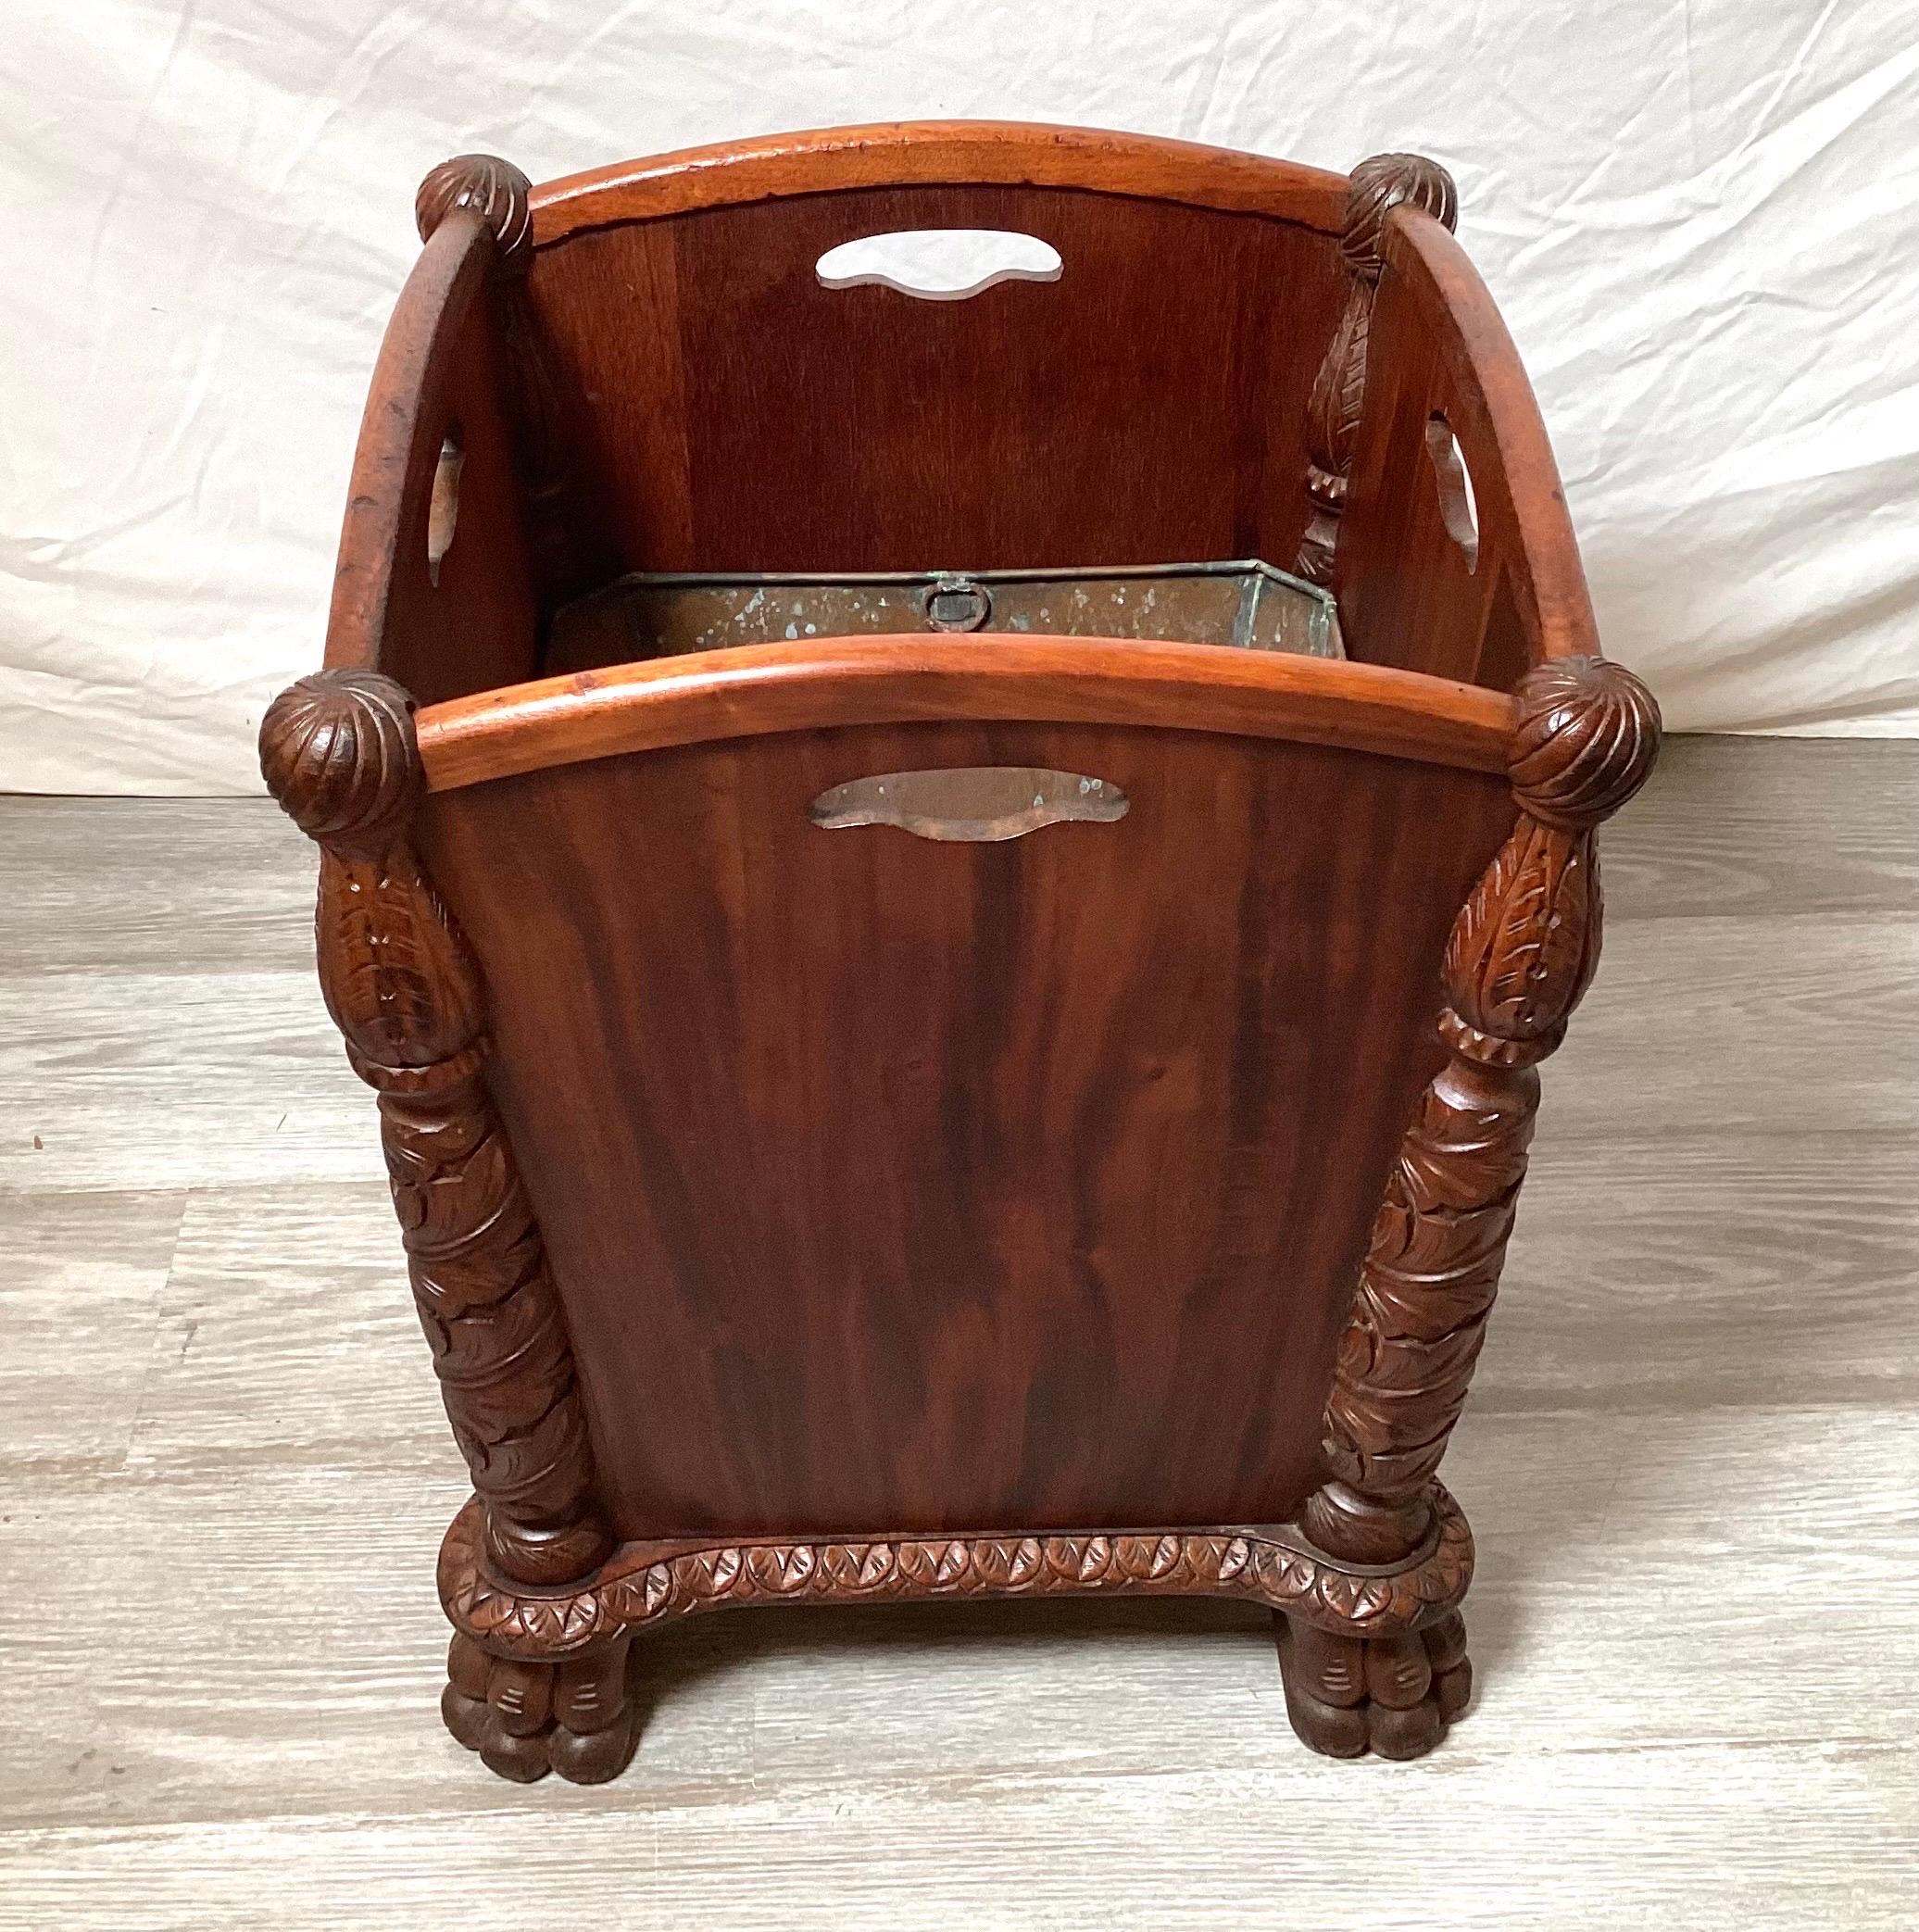 An ornately carved Victorian era waste basket with copper lining, The curved form with lion paw feet with 4 carved in hand grips. The wood is flame mahogany , 18 inches tall, 14 inches square.